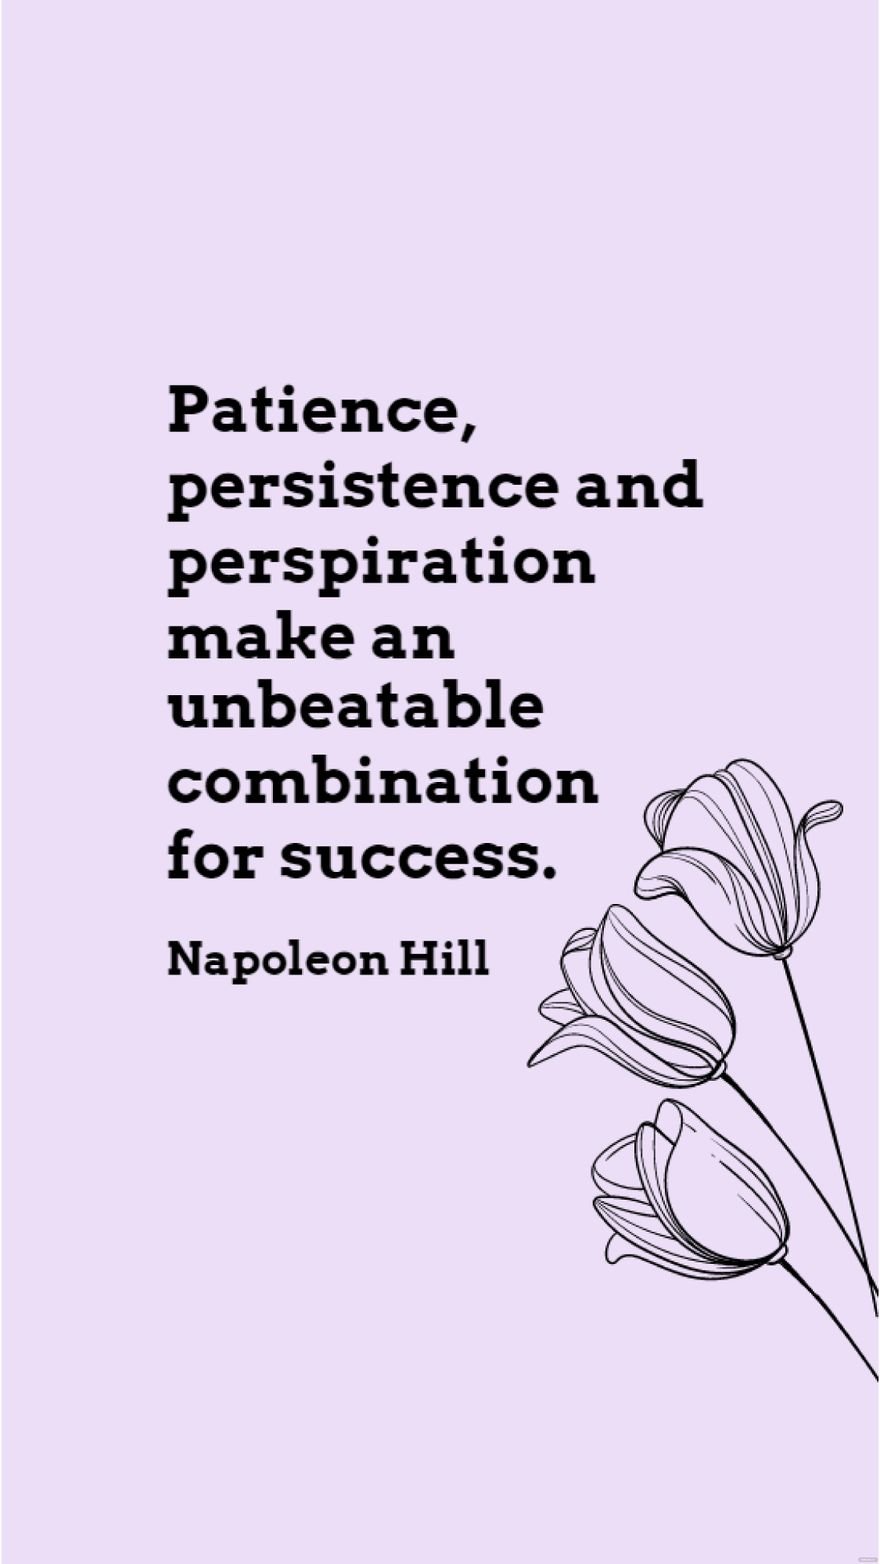 Free Napoleon Hill - Patience, persistence and perspiration make an unbeatable combination for success.